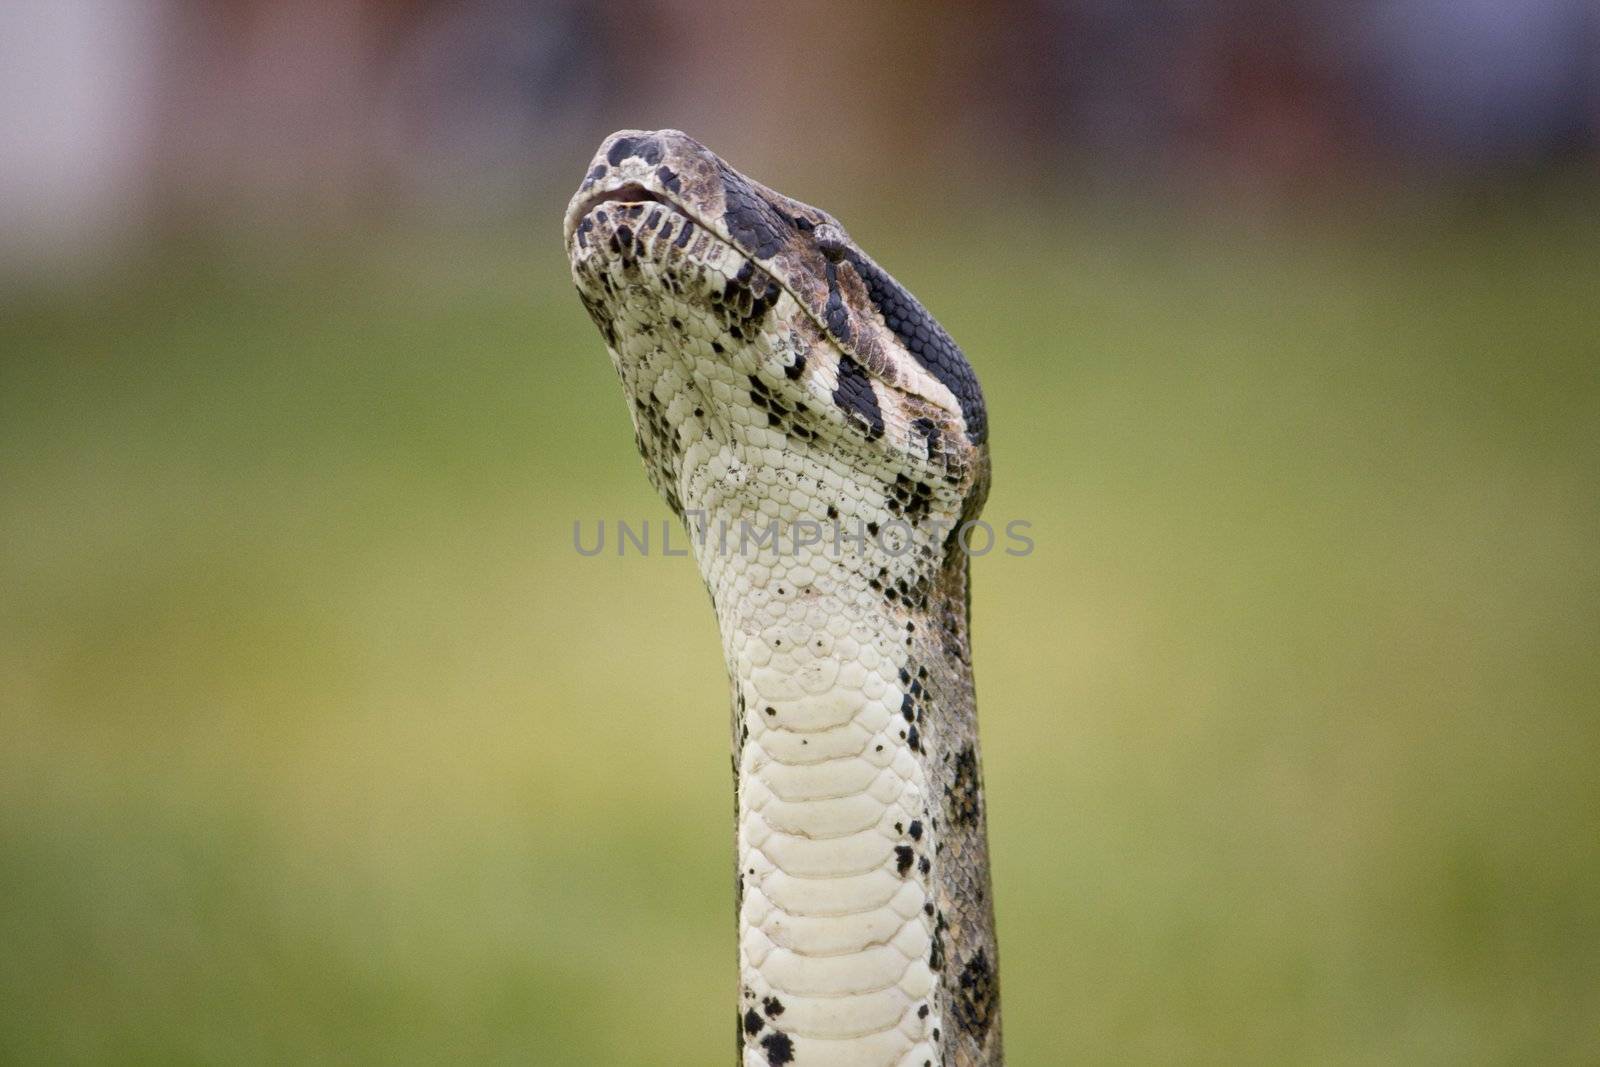 View of the head of a boa constrictor snake trying to sniff on the air.